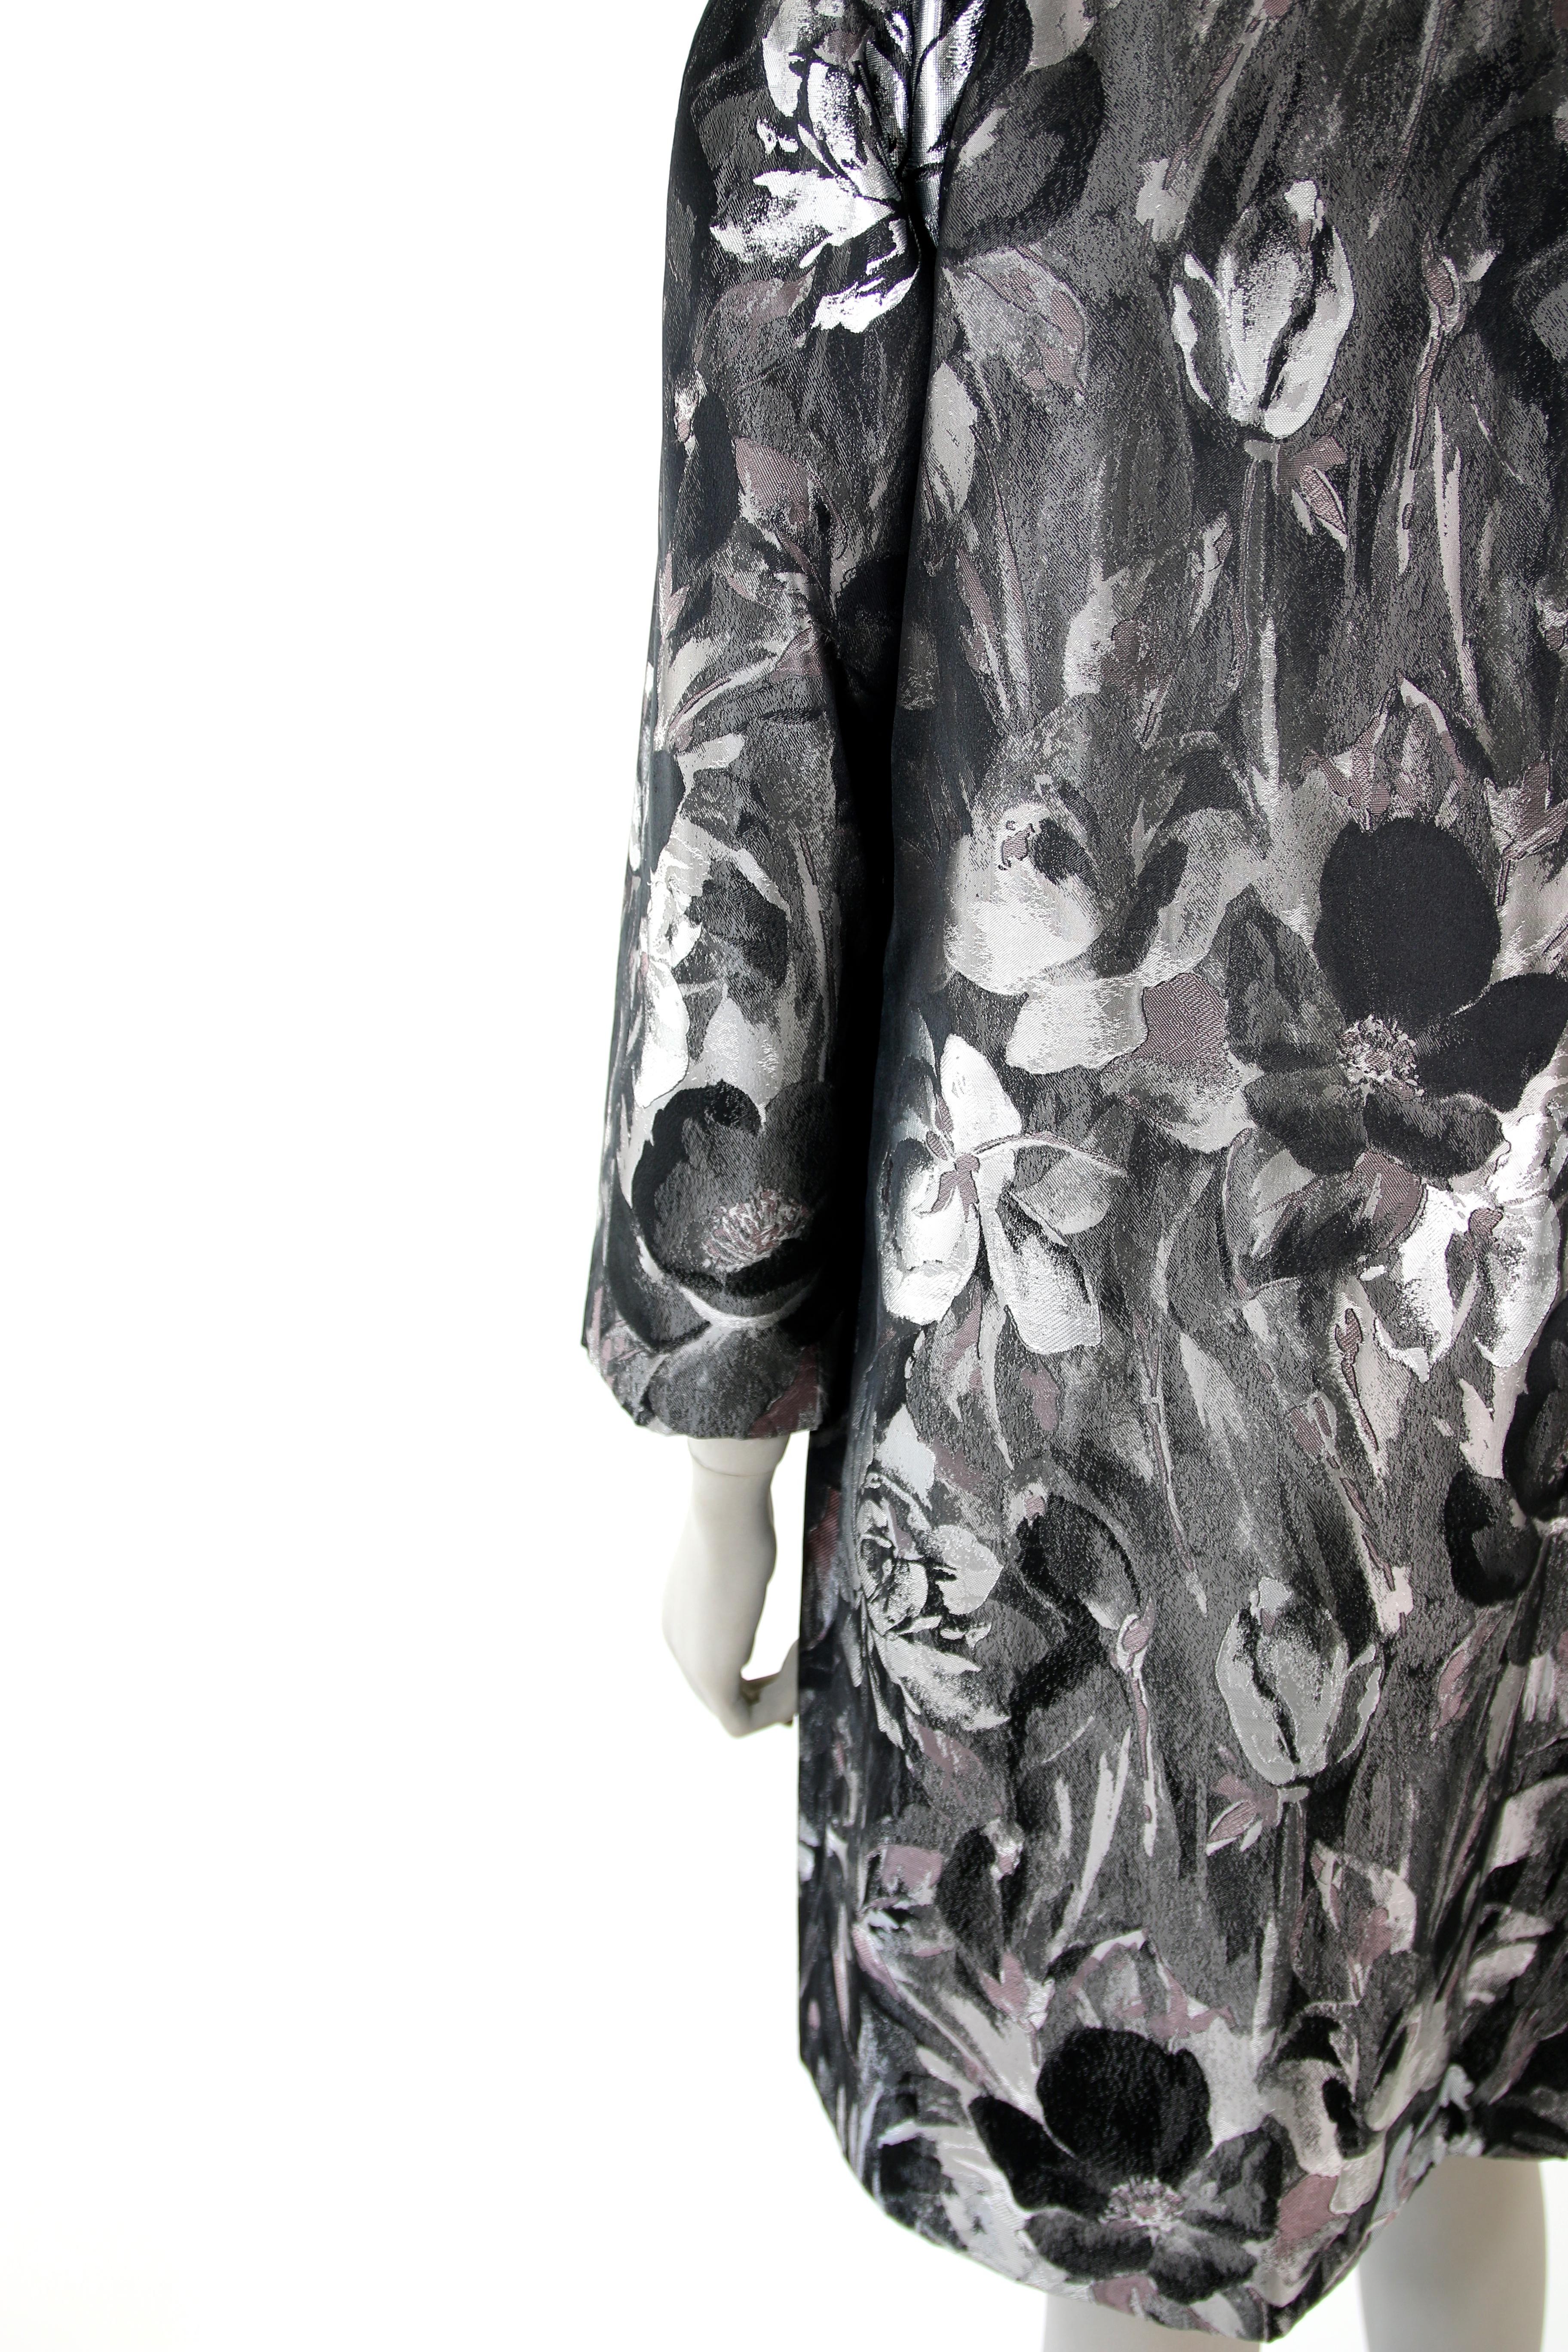 Pelush Black and Silver Brocade Printed Flower Coat - XS For Sale 6